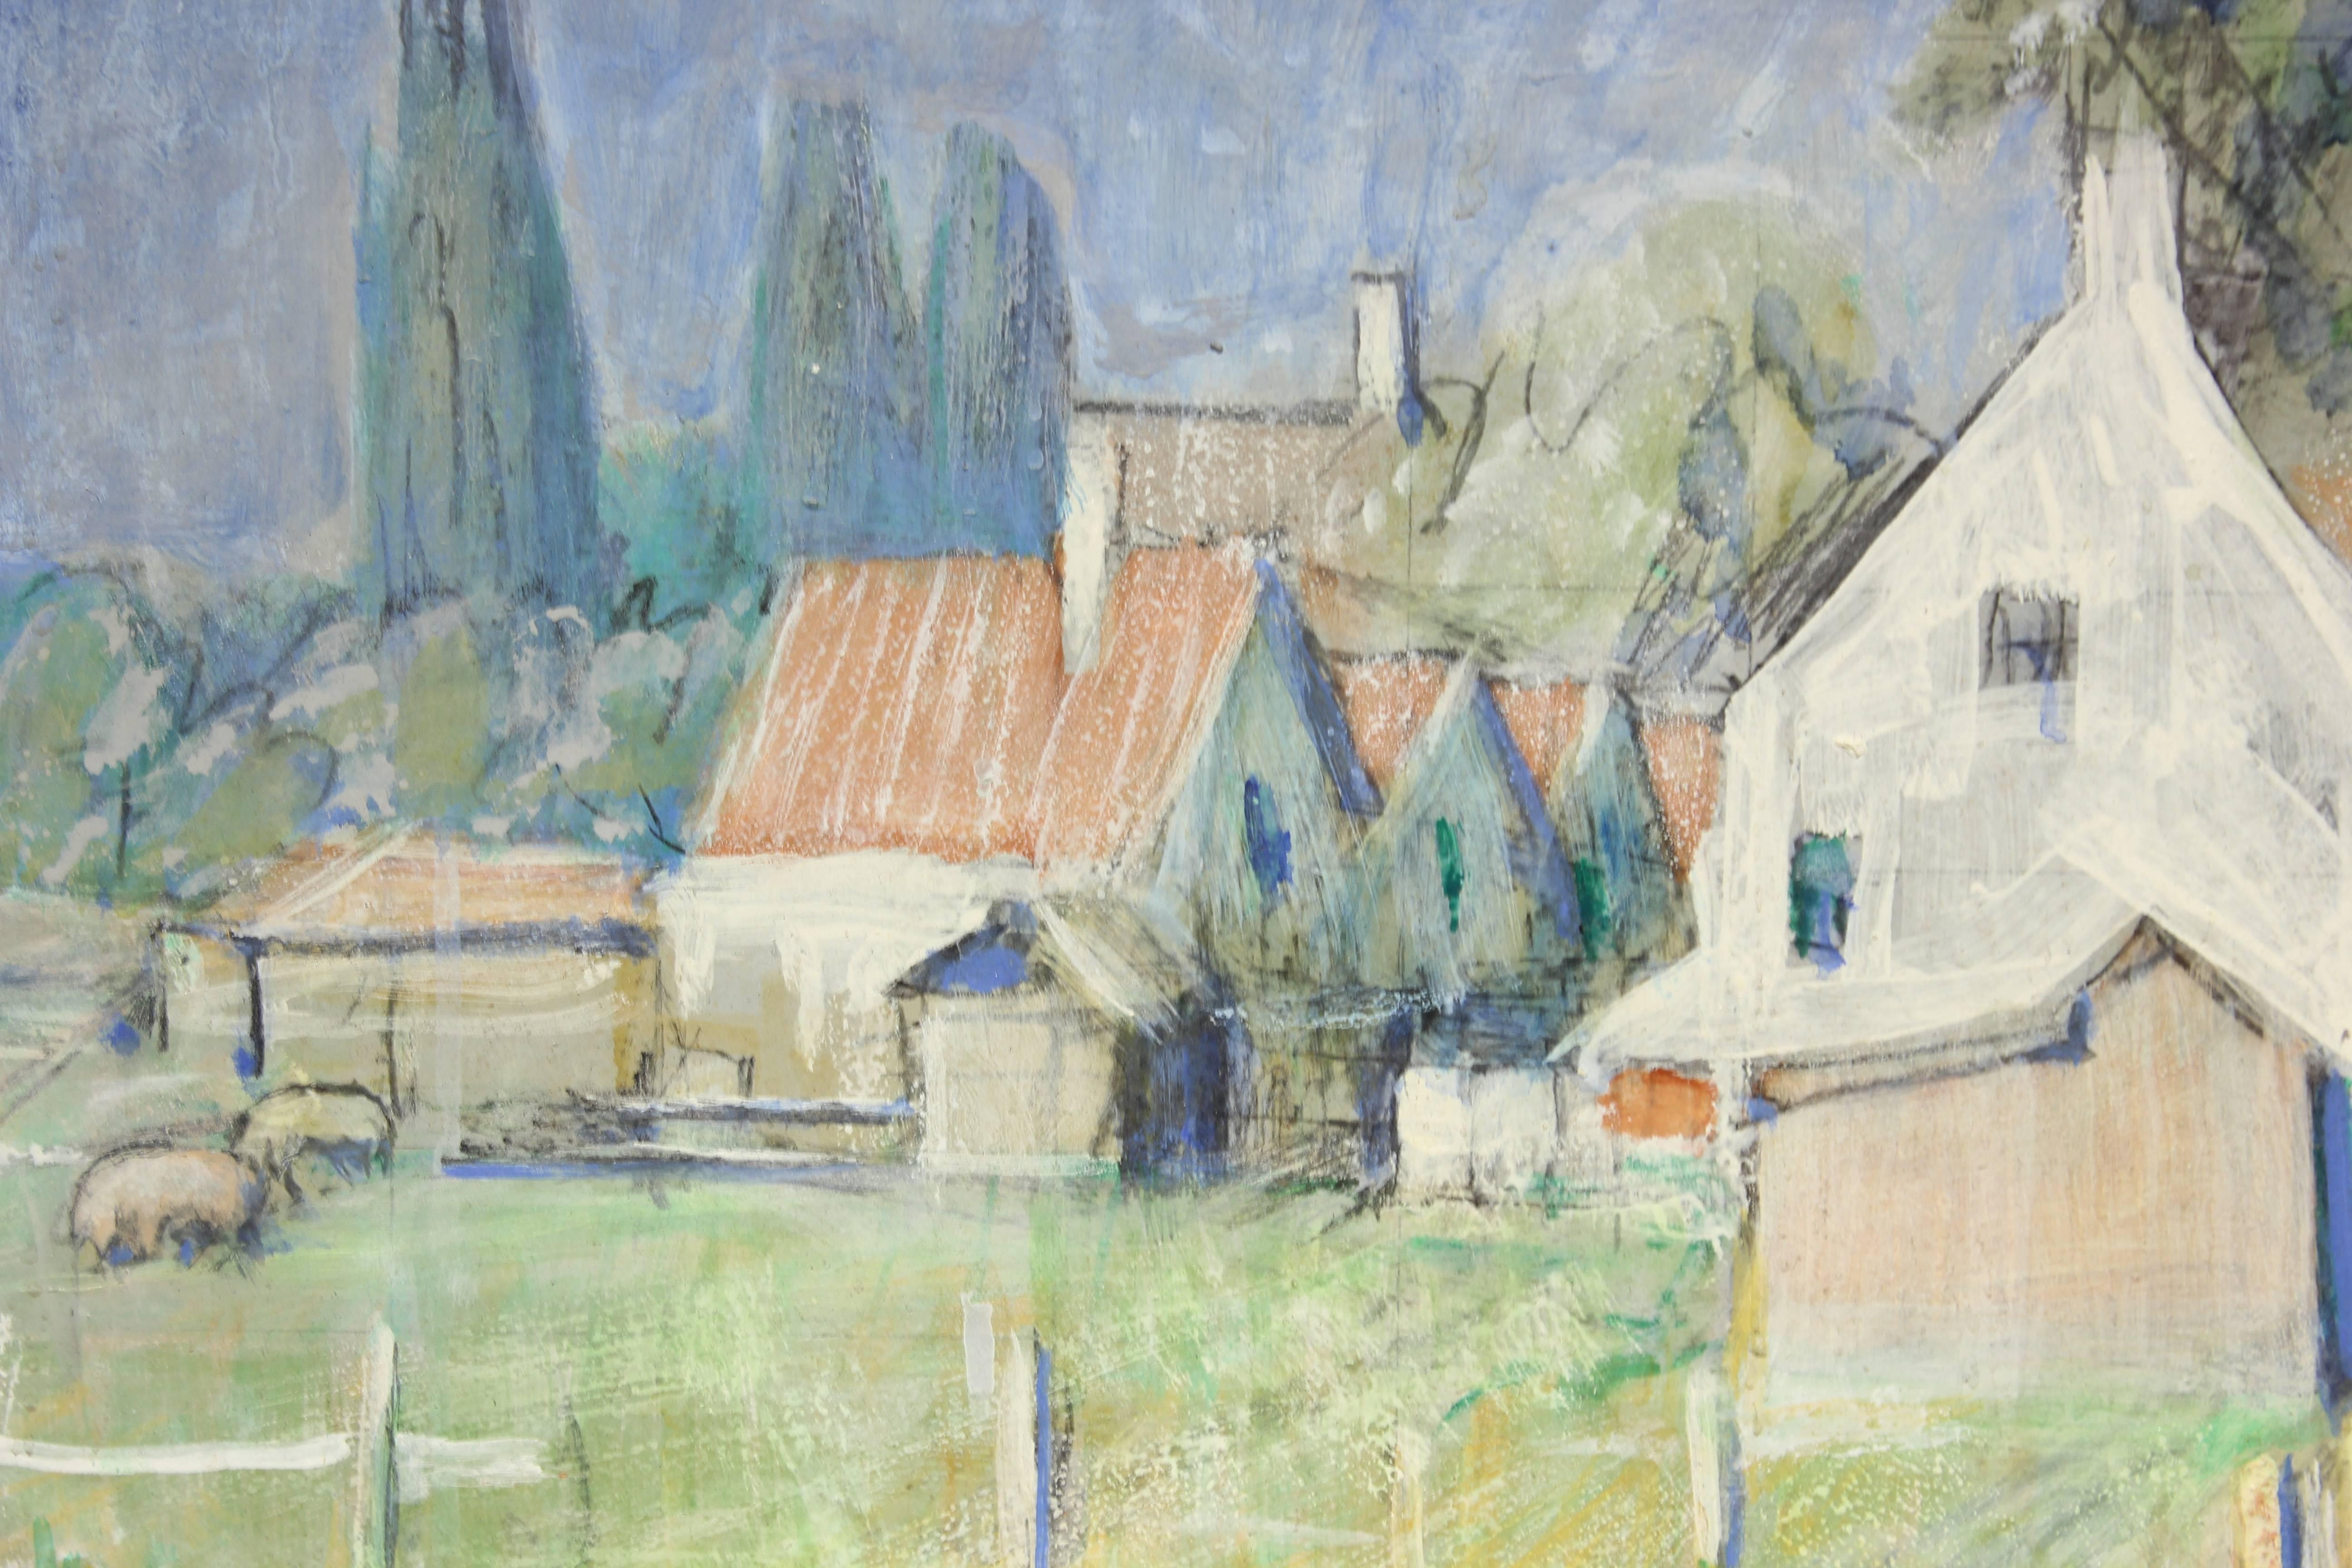 Gorgeous French countryside painting of a white house and a field in pastel tones. Signed and dated on the back. 
Dimensions Without Frame: H 12.88 in. x W 15.5 in. x D 1 in.
